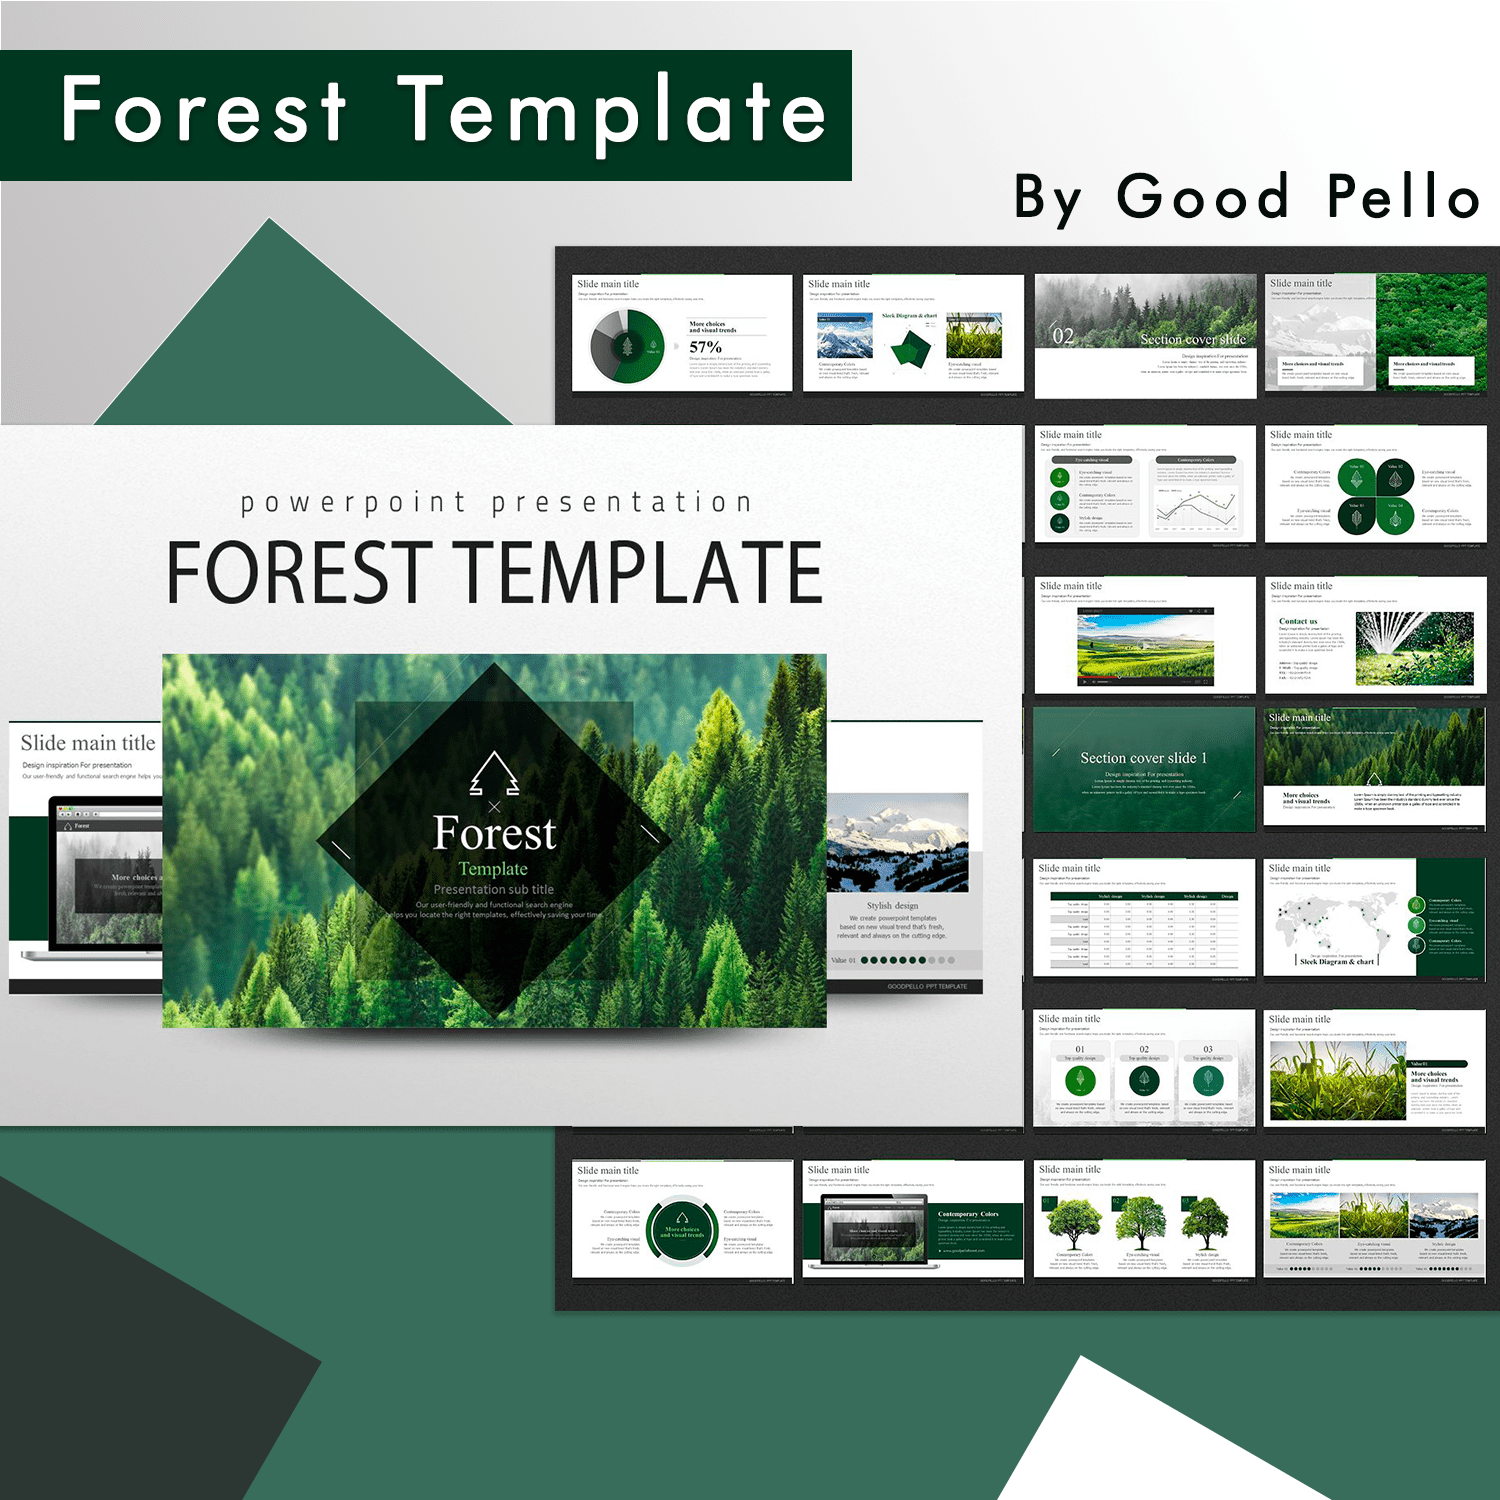 2forest template 1500x1500.